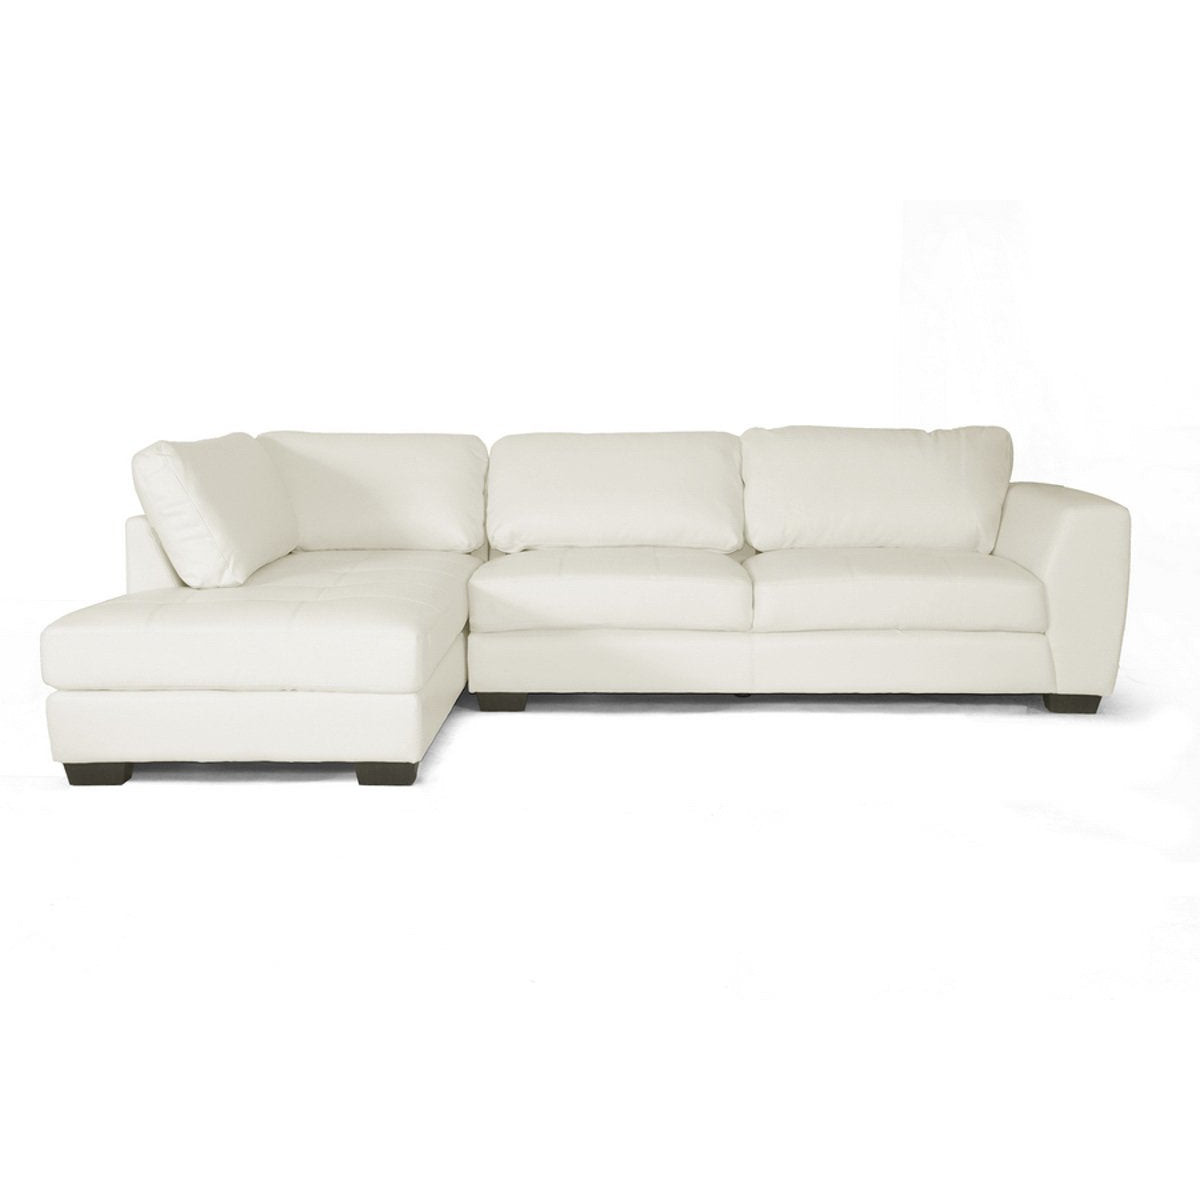 Baxton Studio Orland White Leather Modern Sectional Sofa Set with Left Facing Chaise Baxton Studio-sectionals-Minimal And Modern - 2